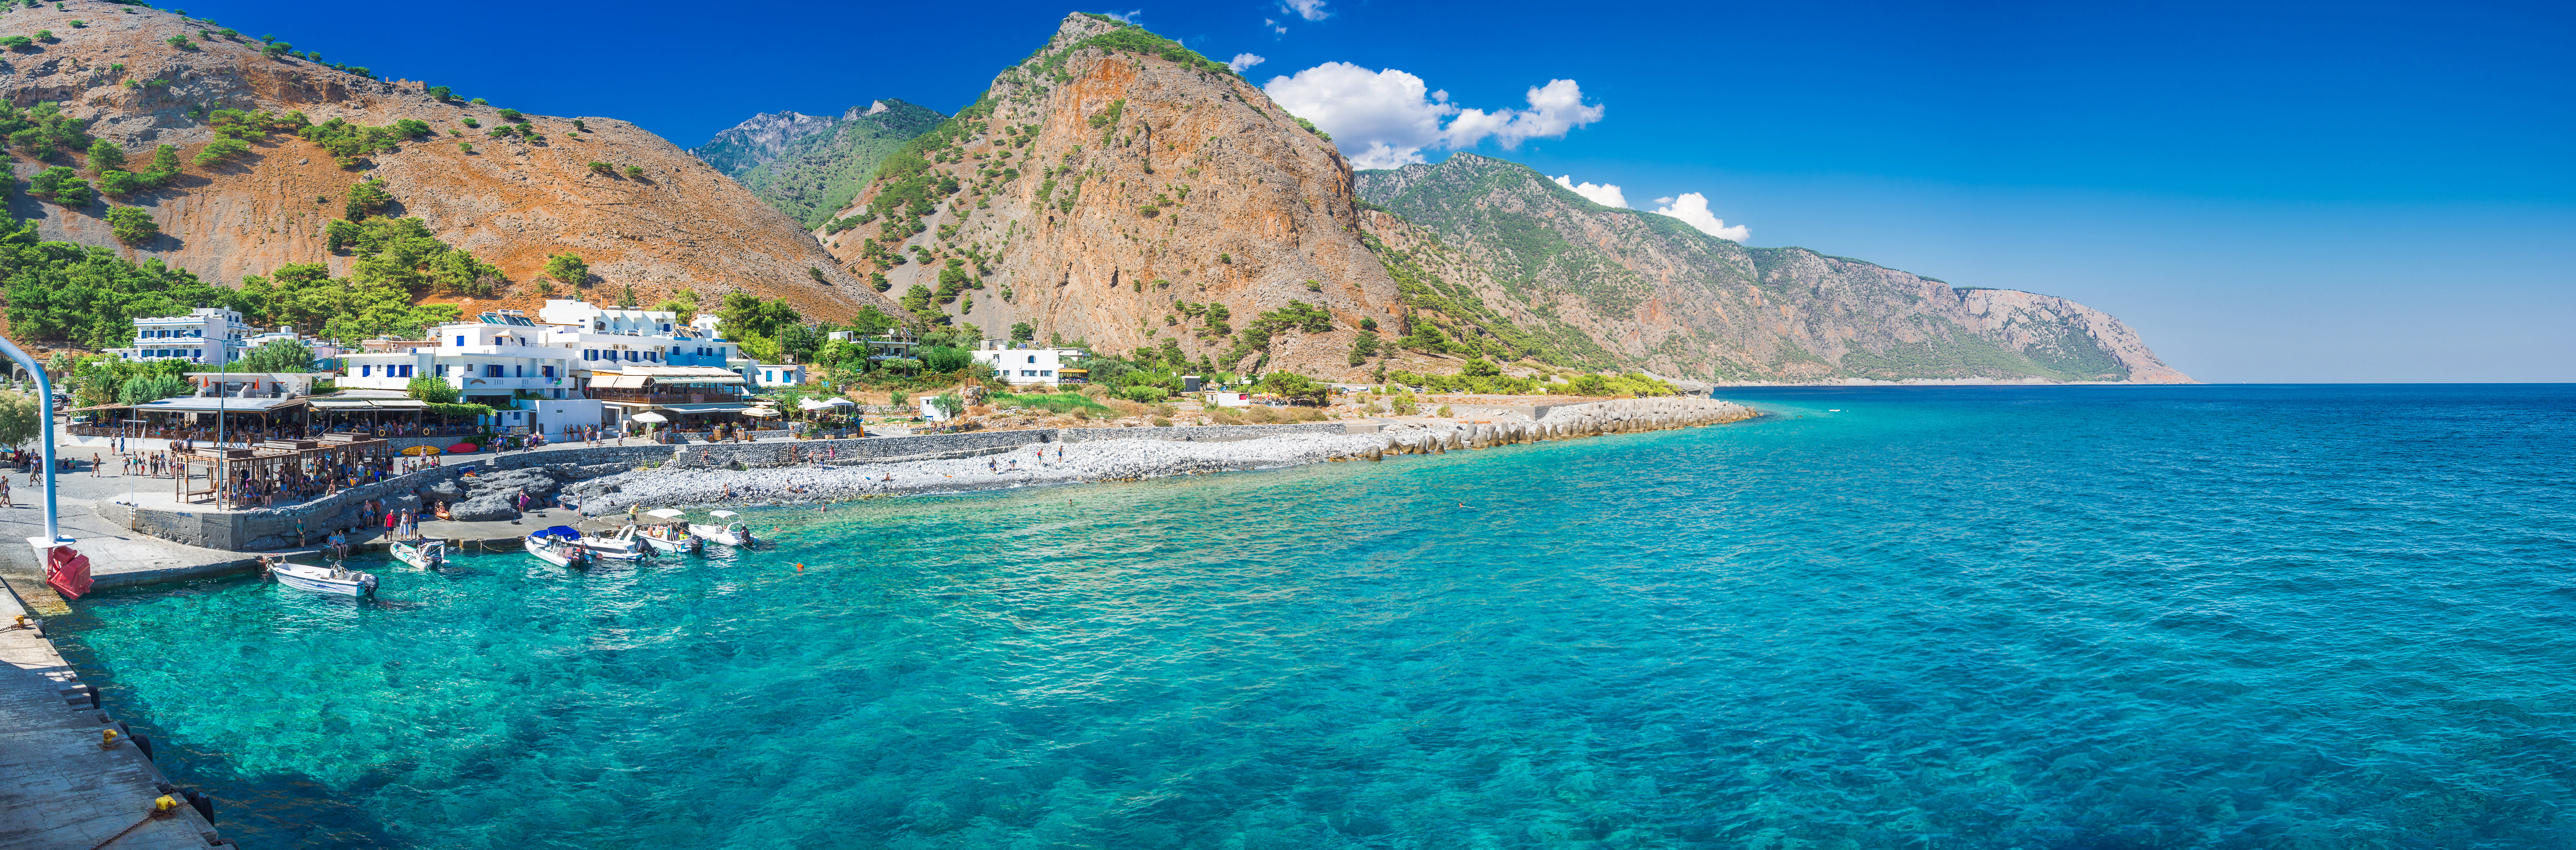 Crete: Agia Roumeli, the Greek village at the end of the largest gorge